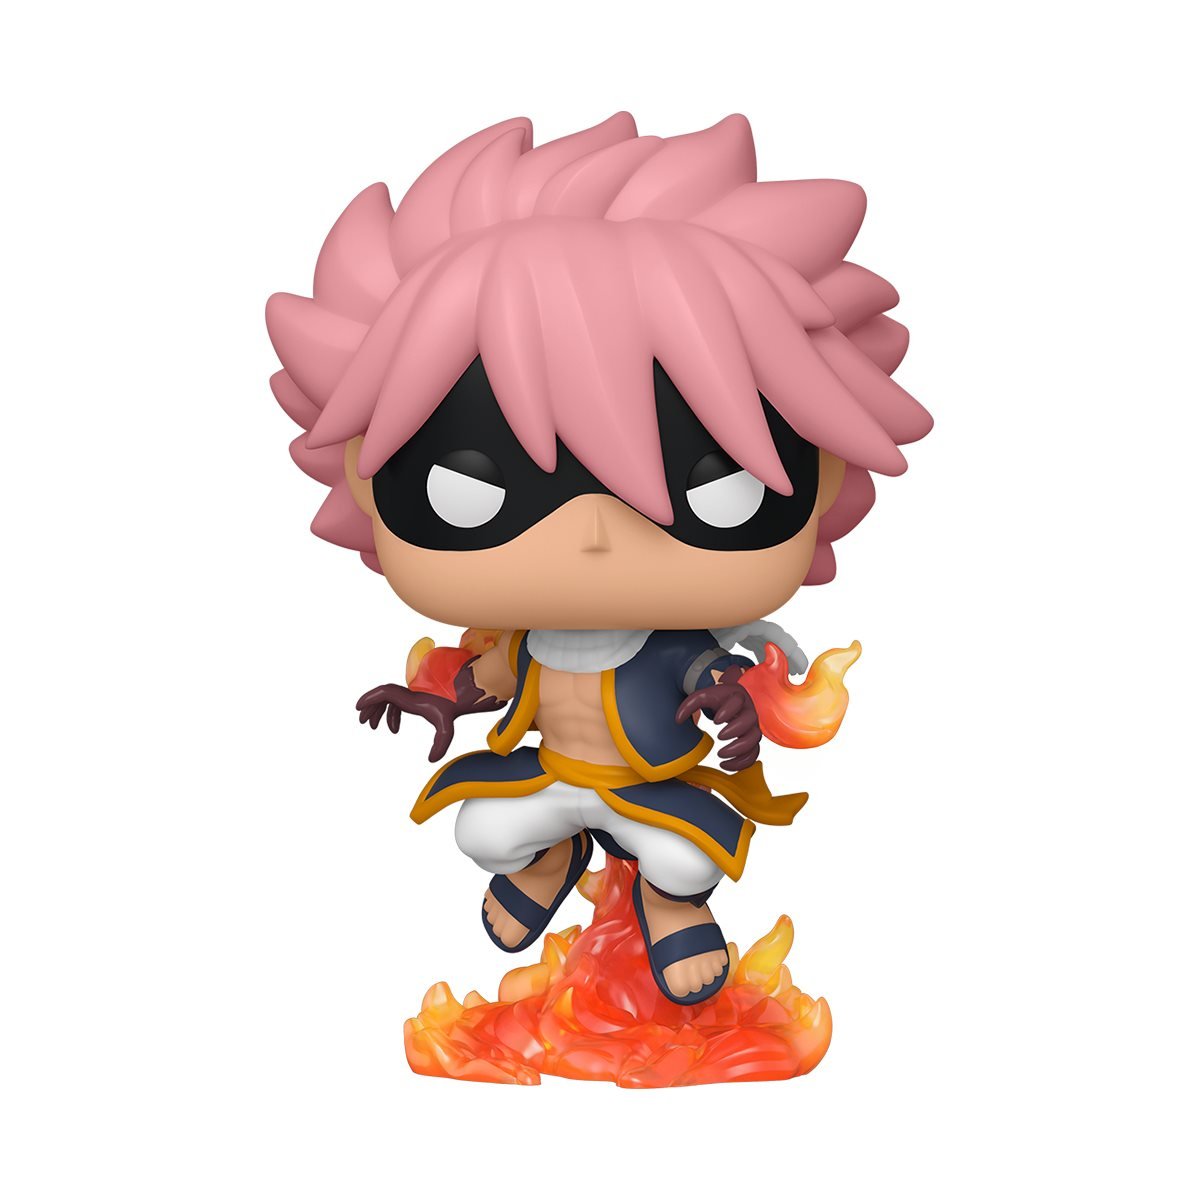 Fairy Tail Etherious Natsu Dragneel E.N.D. Pop! Vinyl Figure - AAA Anime  Exclusive